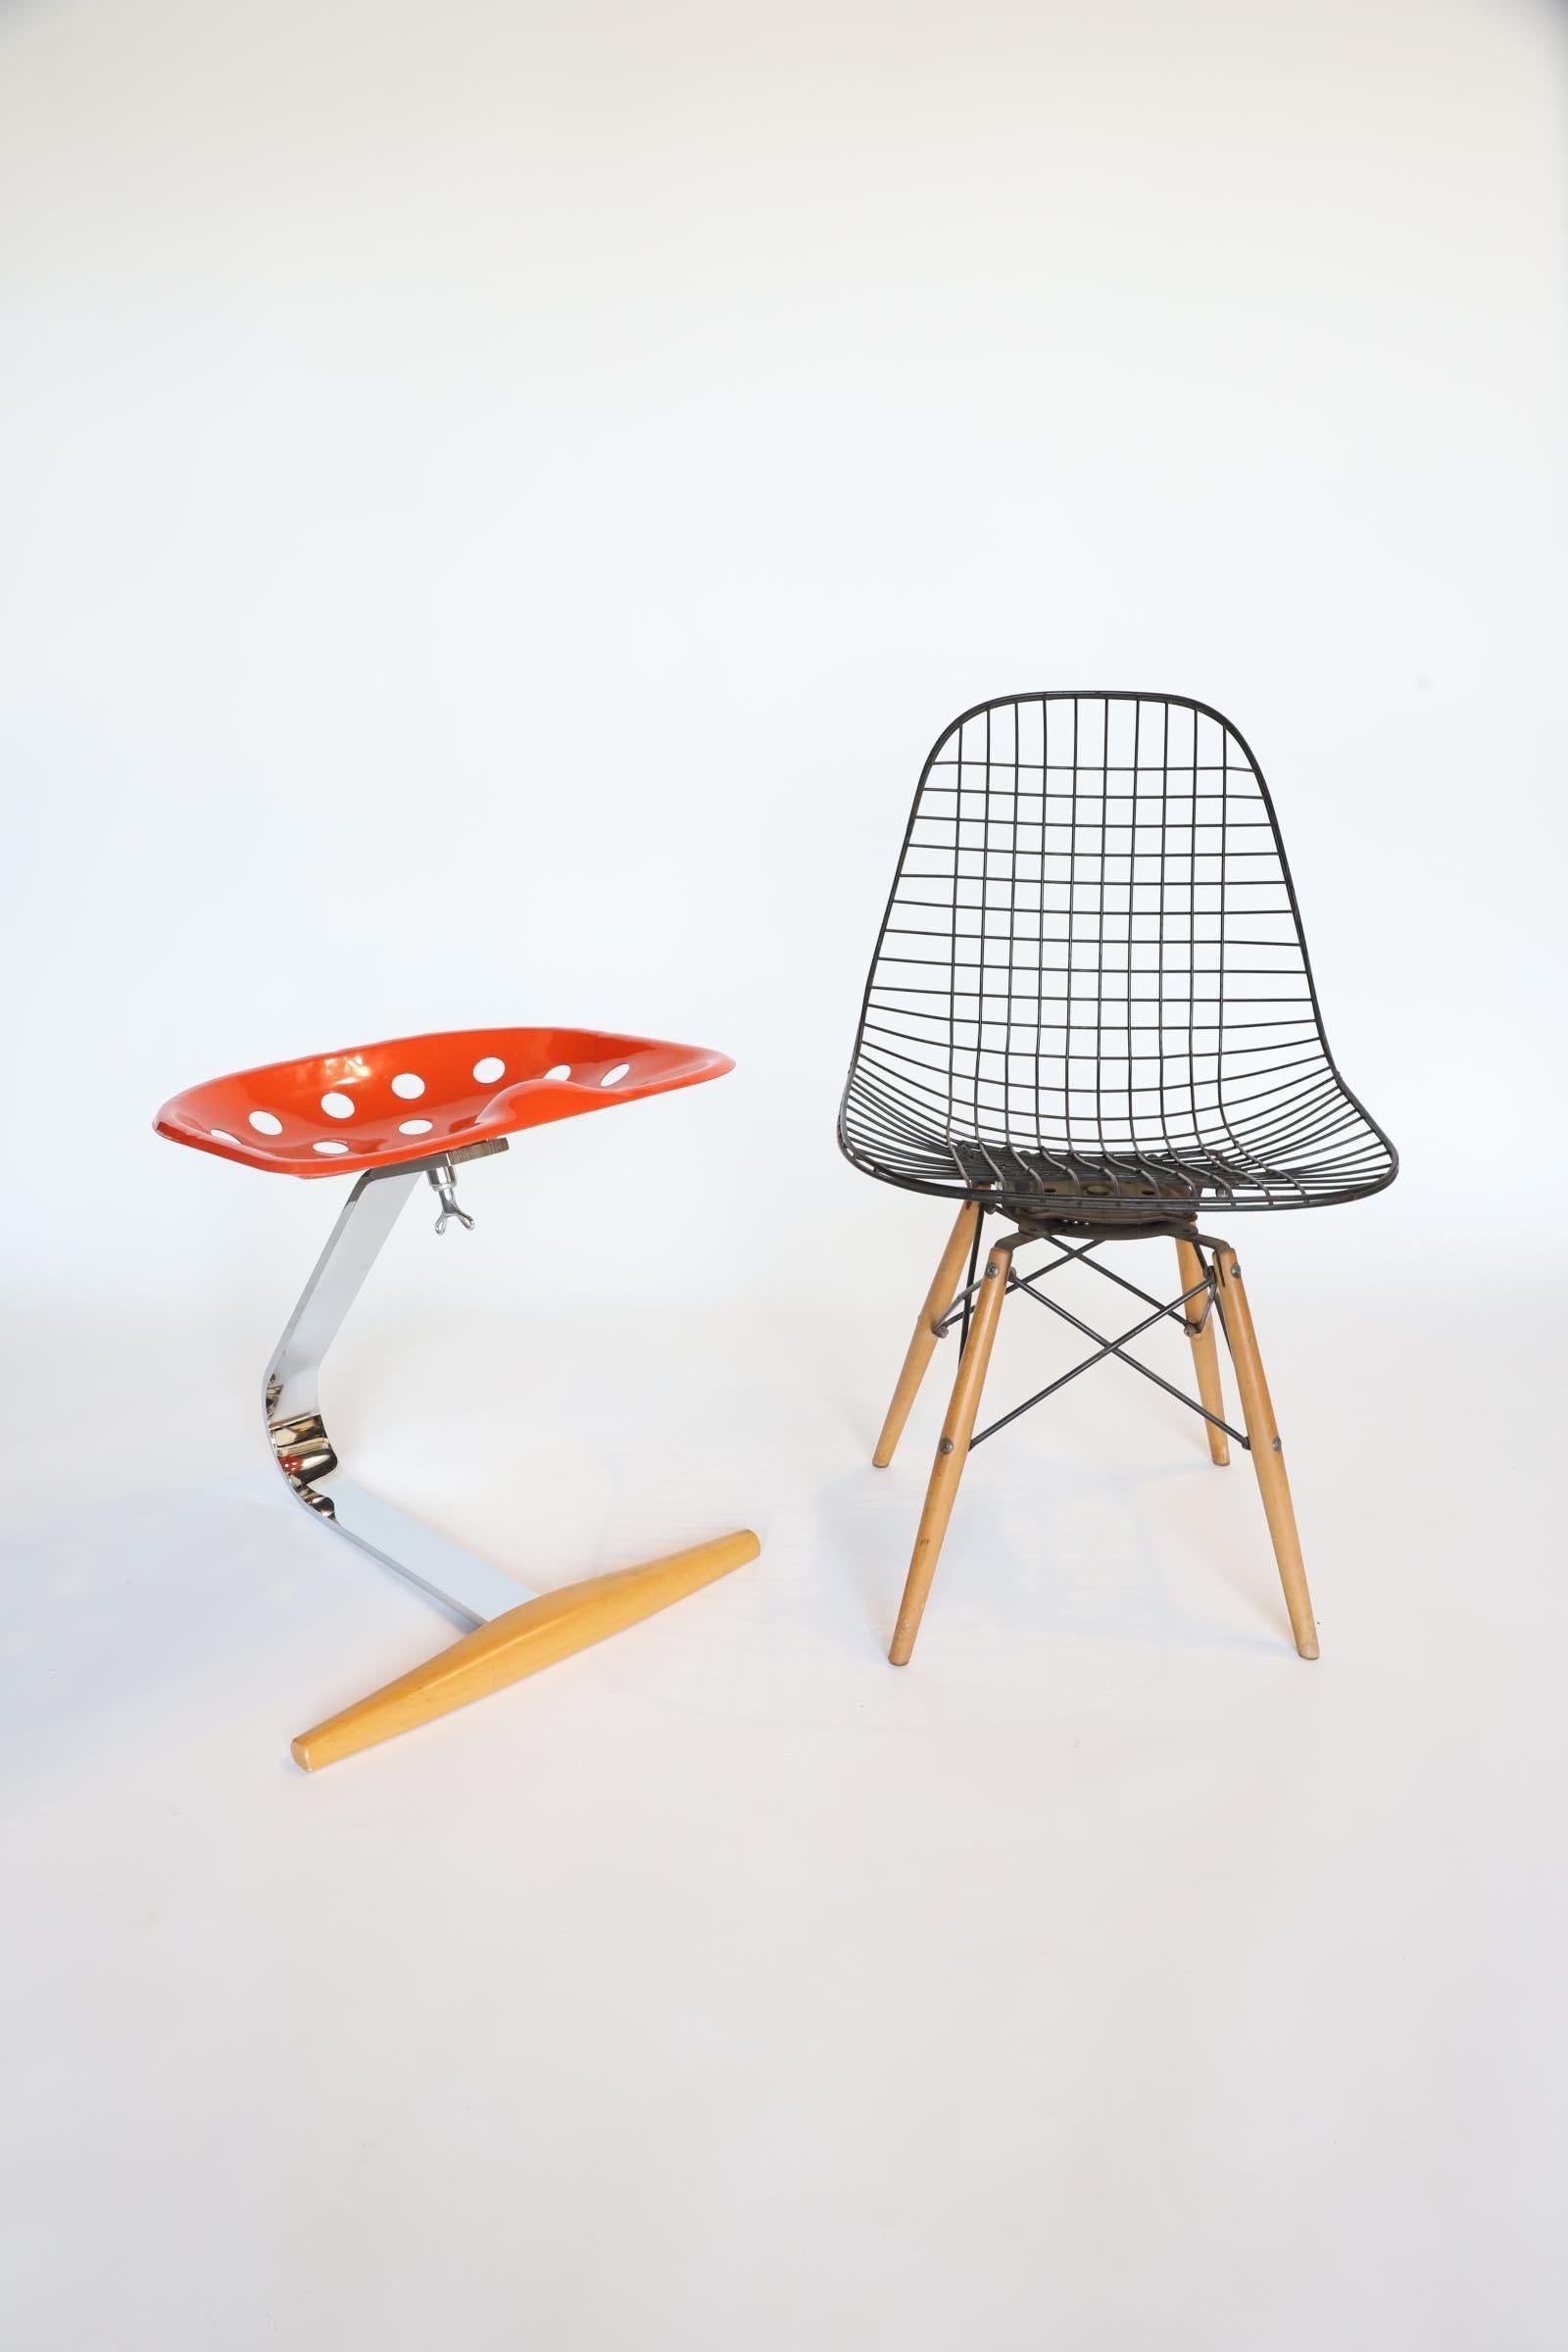 Zanotta Mezzadro Stool in Orange/Red with Steel and Wood Base 9